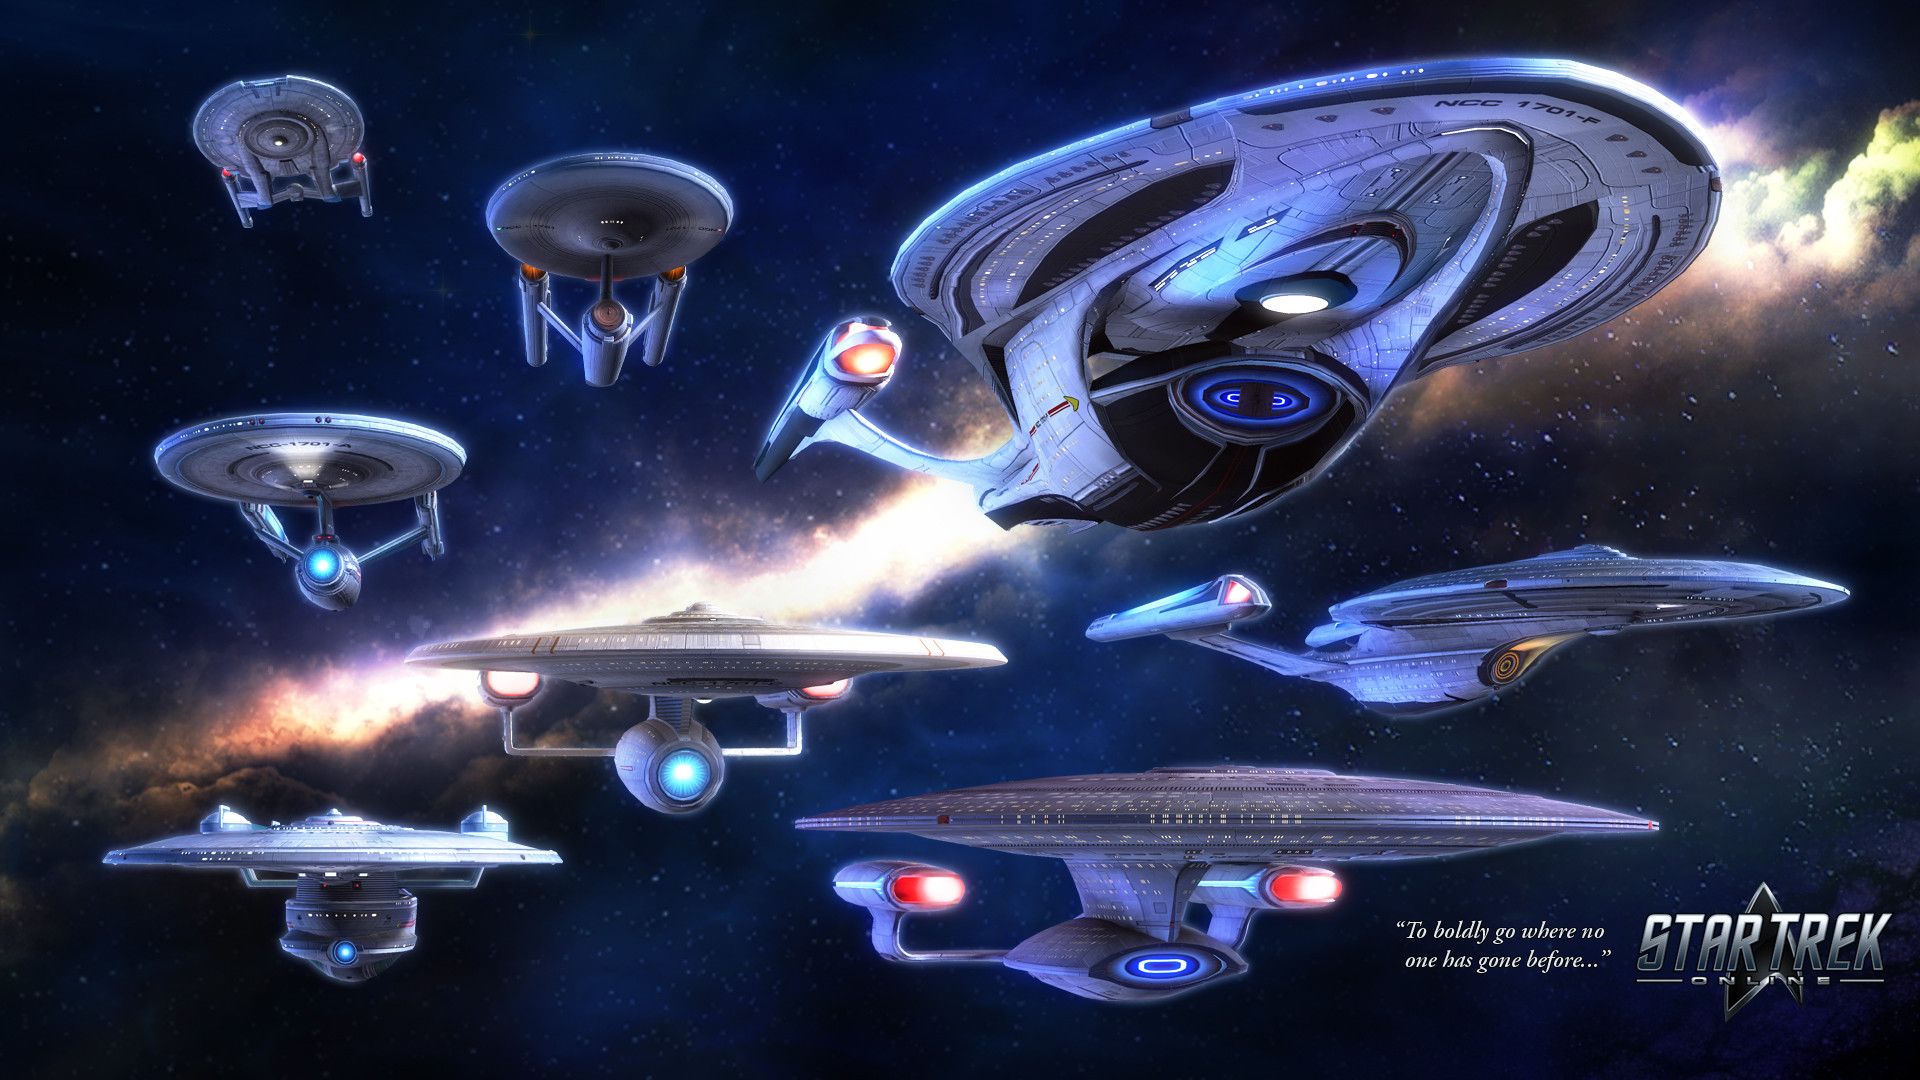 The Star Trek series is a popular science fiction series that has been on air since 1966. - Star Trek